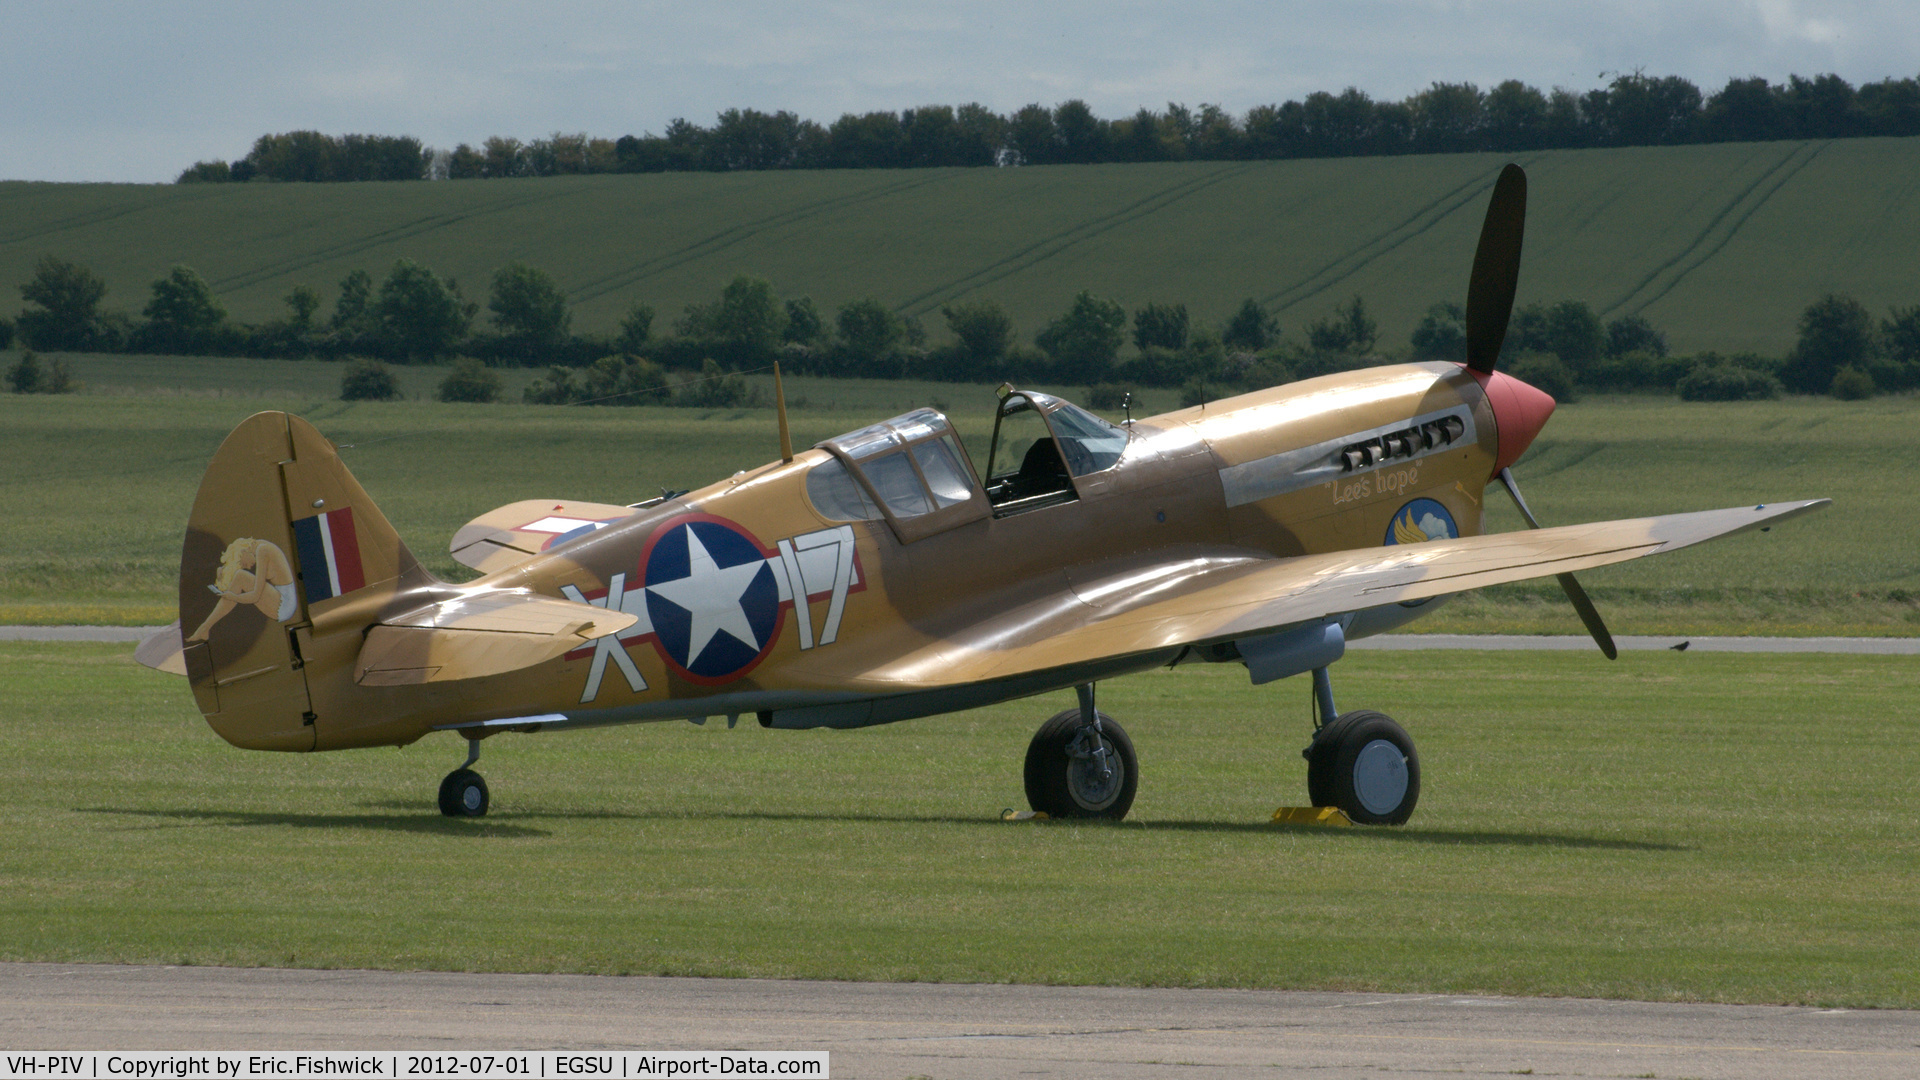 VH-PIV, 1942 Curtiss P-40F Warhawk C/N 19503, 2. G-CGZP at another excellent Flying Legends Air Show (July 2012.)